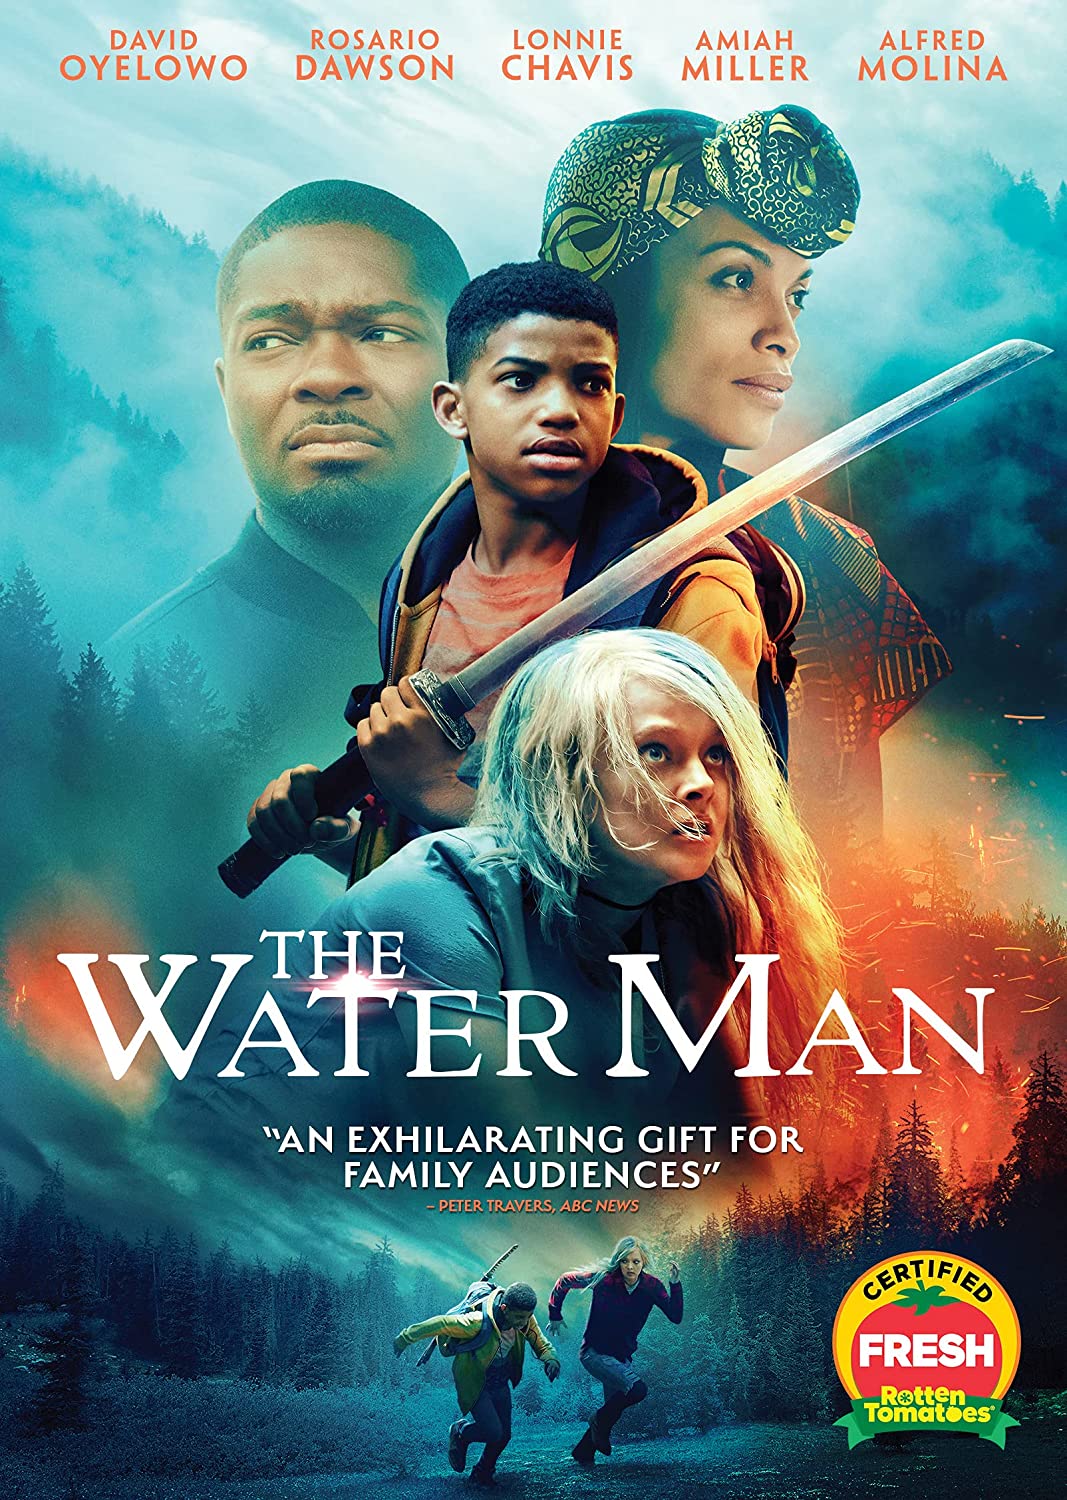 Image for "The Water Man"